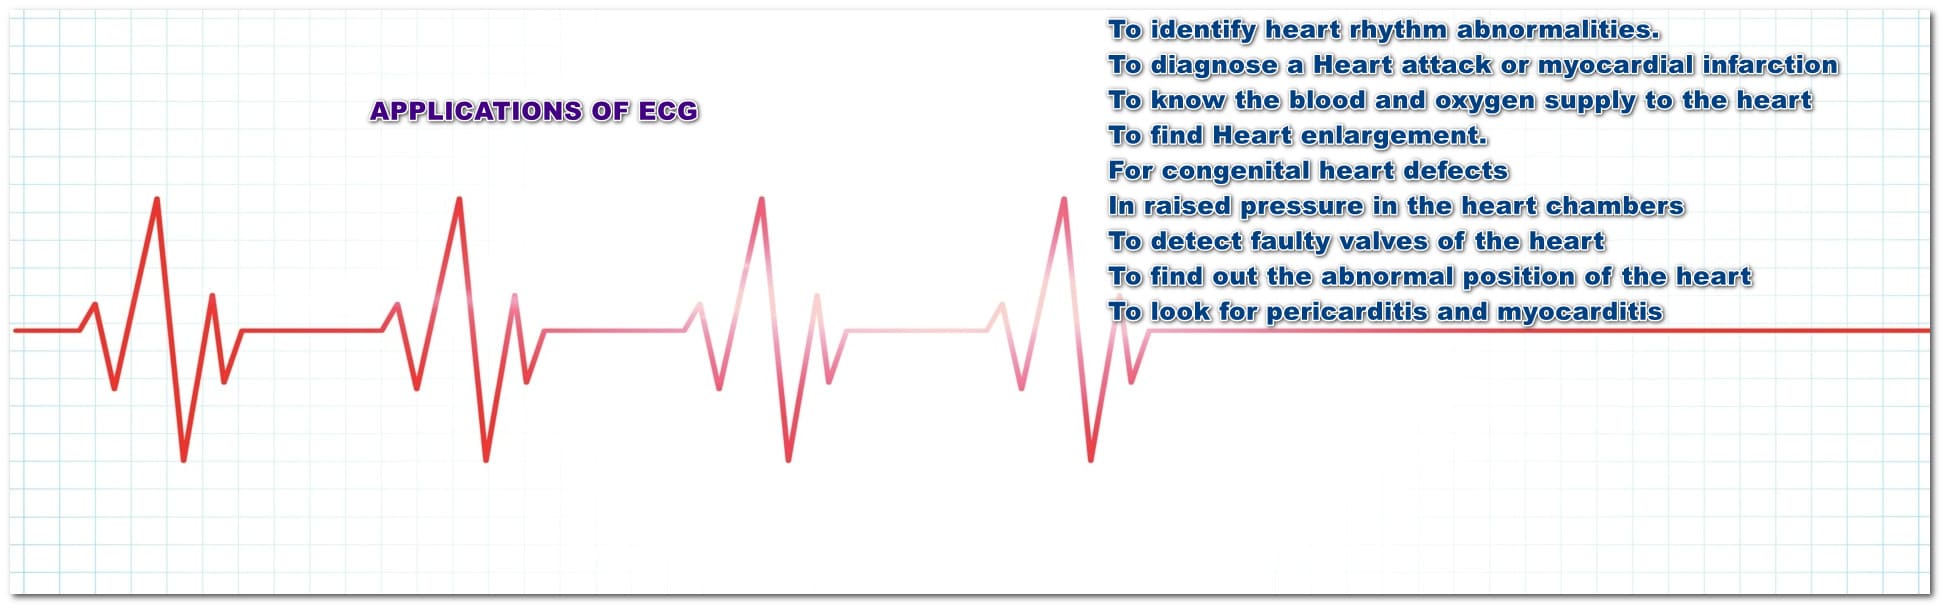 Uses of an ECG test